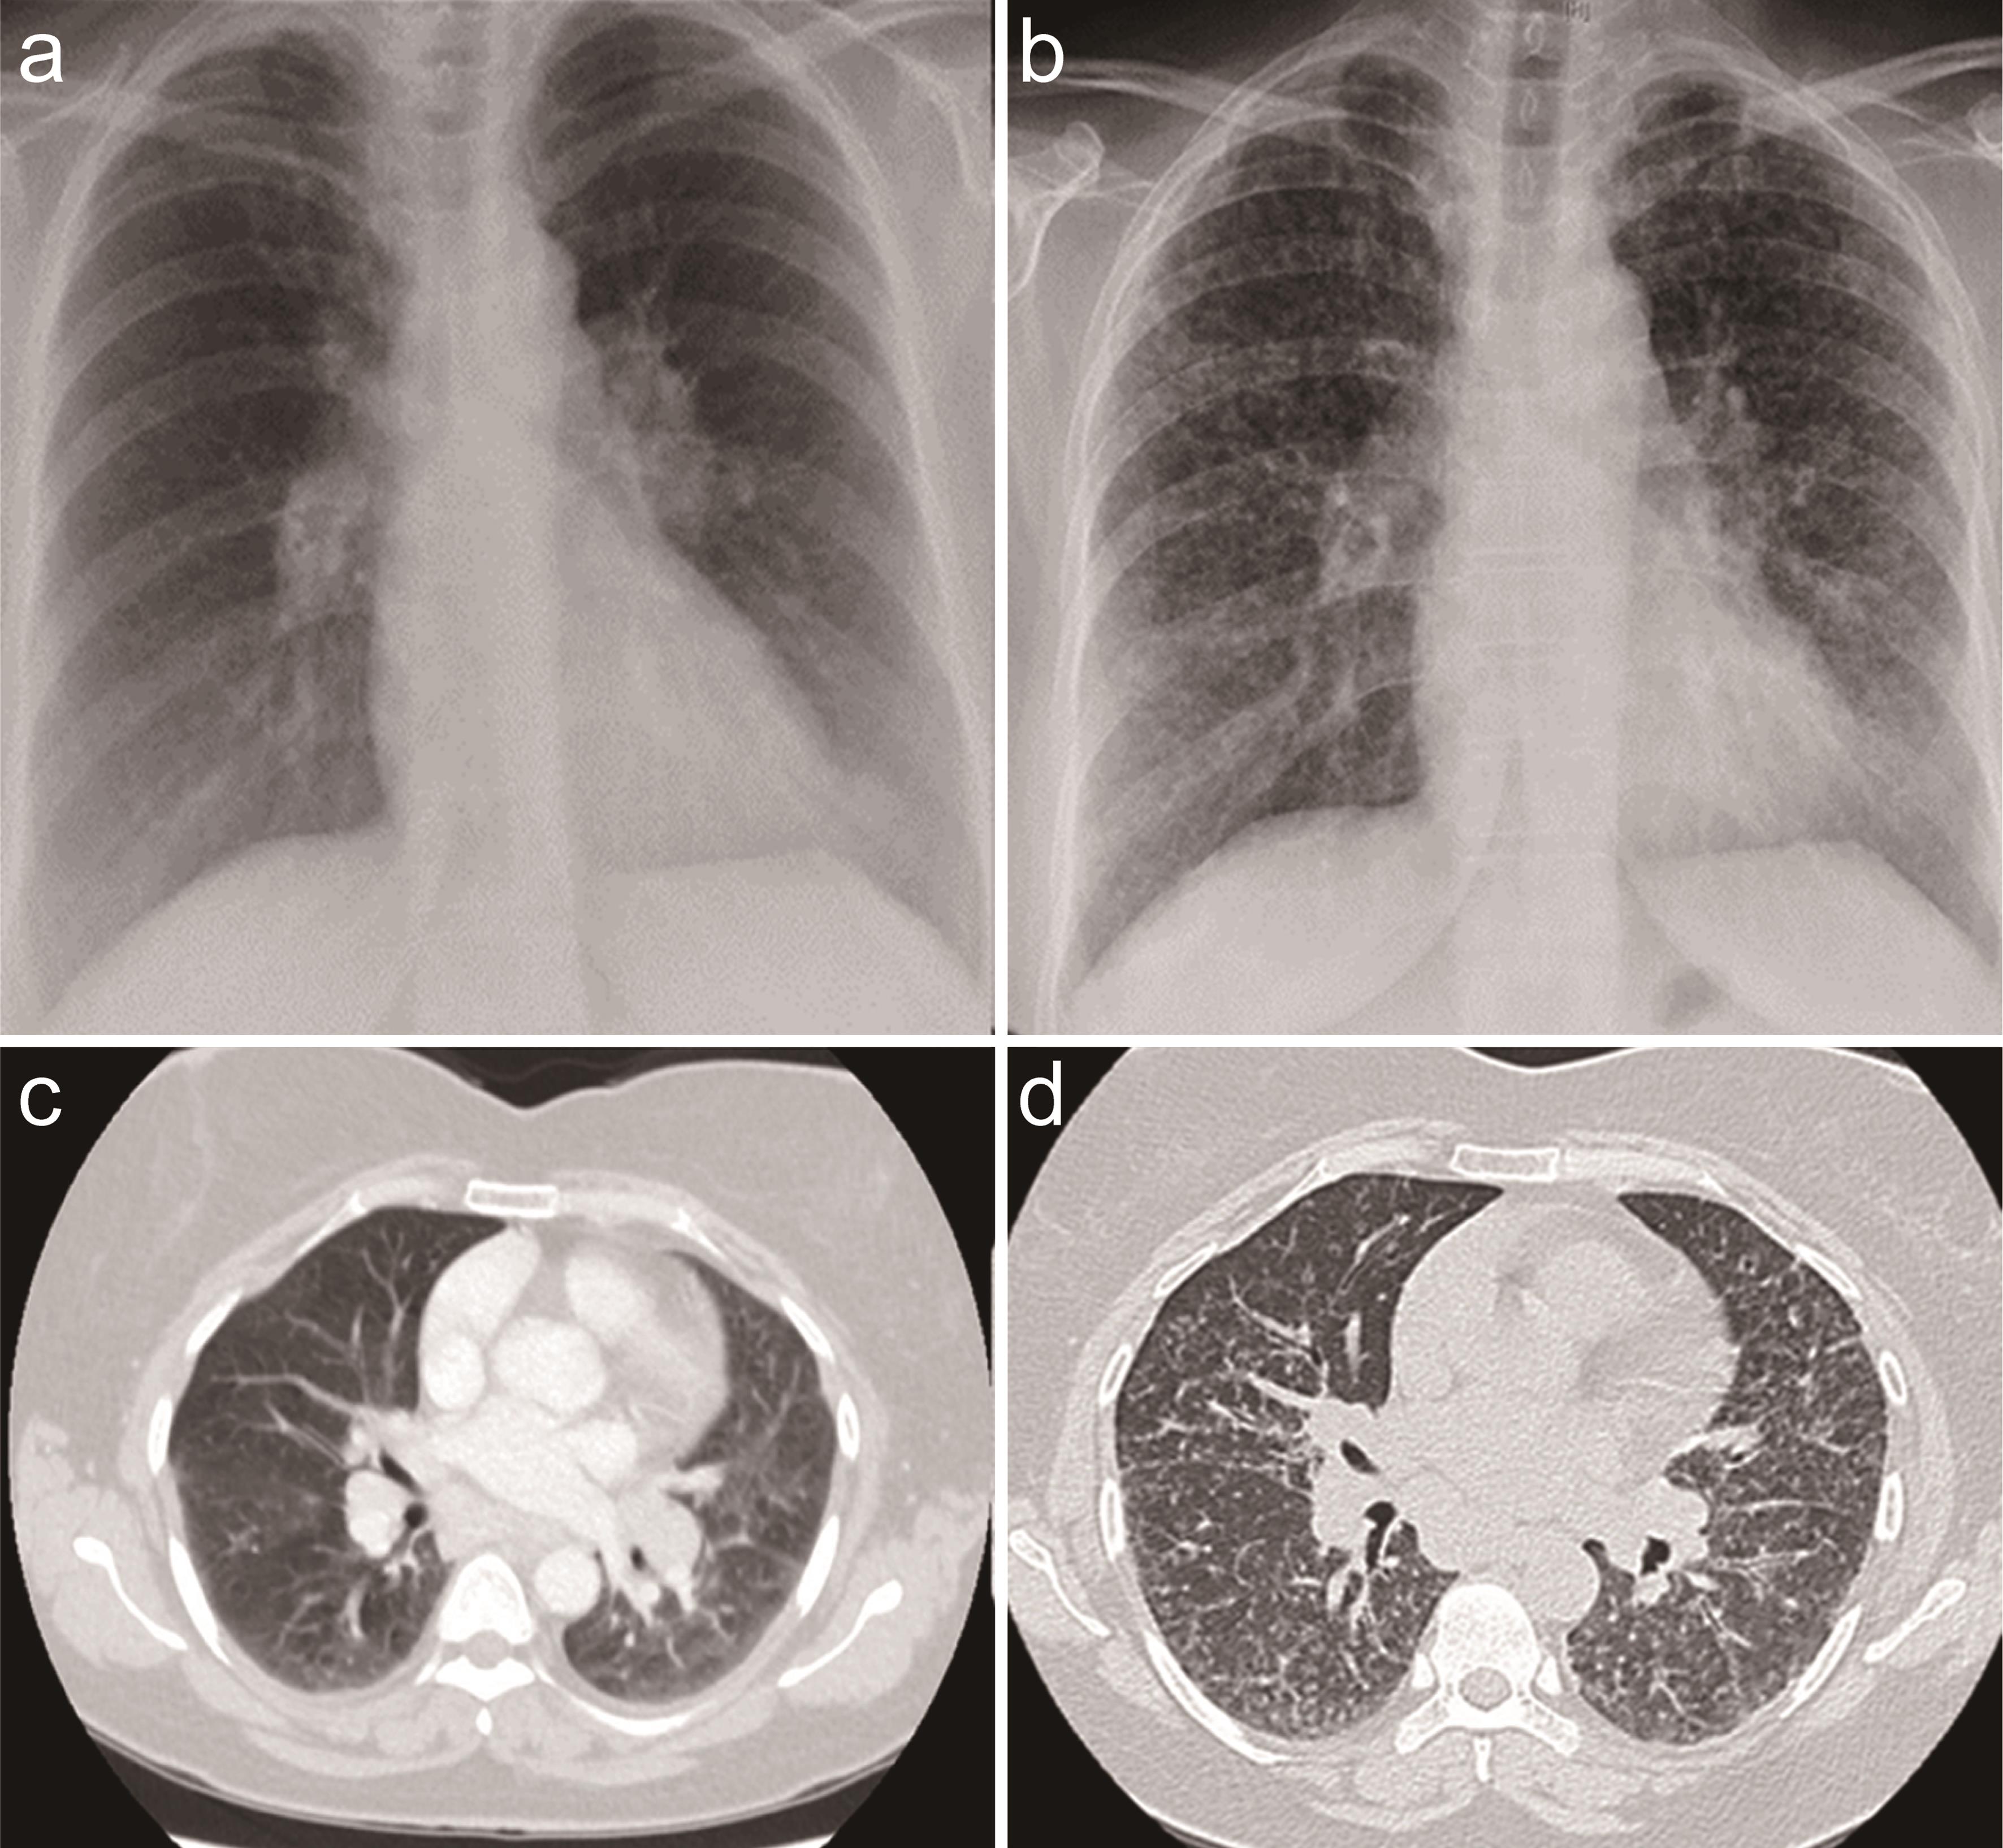 Initial CXR (a) and HRCT (c) chest showed bilateral lymphadenopathy. CXR (b) and HRCT (d) of the chest performed a year later showed a miliary pattern along with bilateral lymphadenopathy.